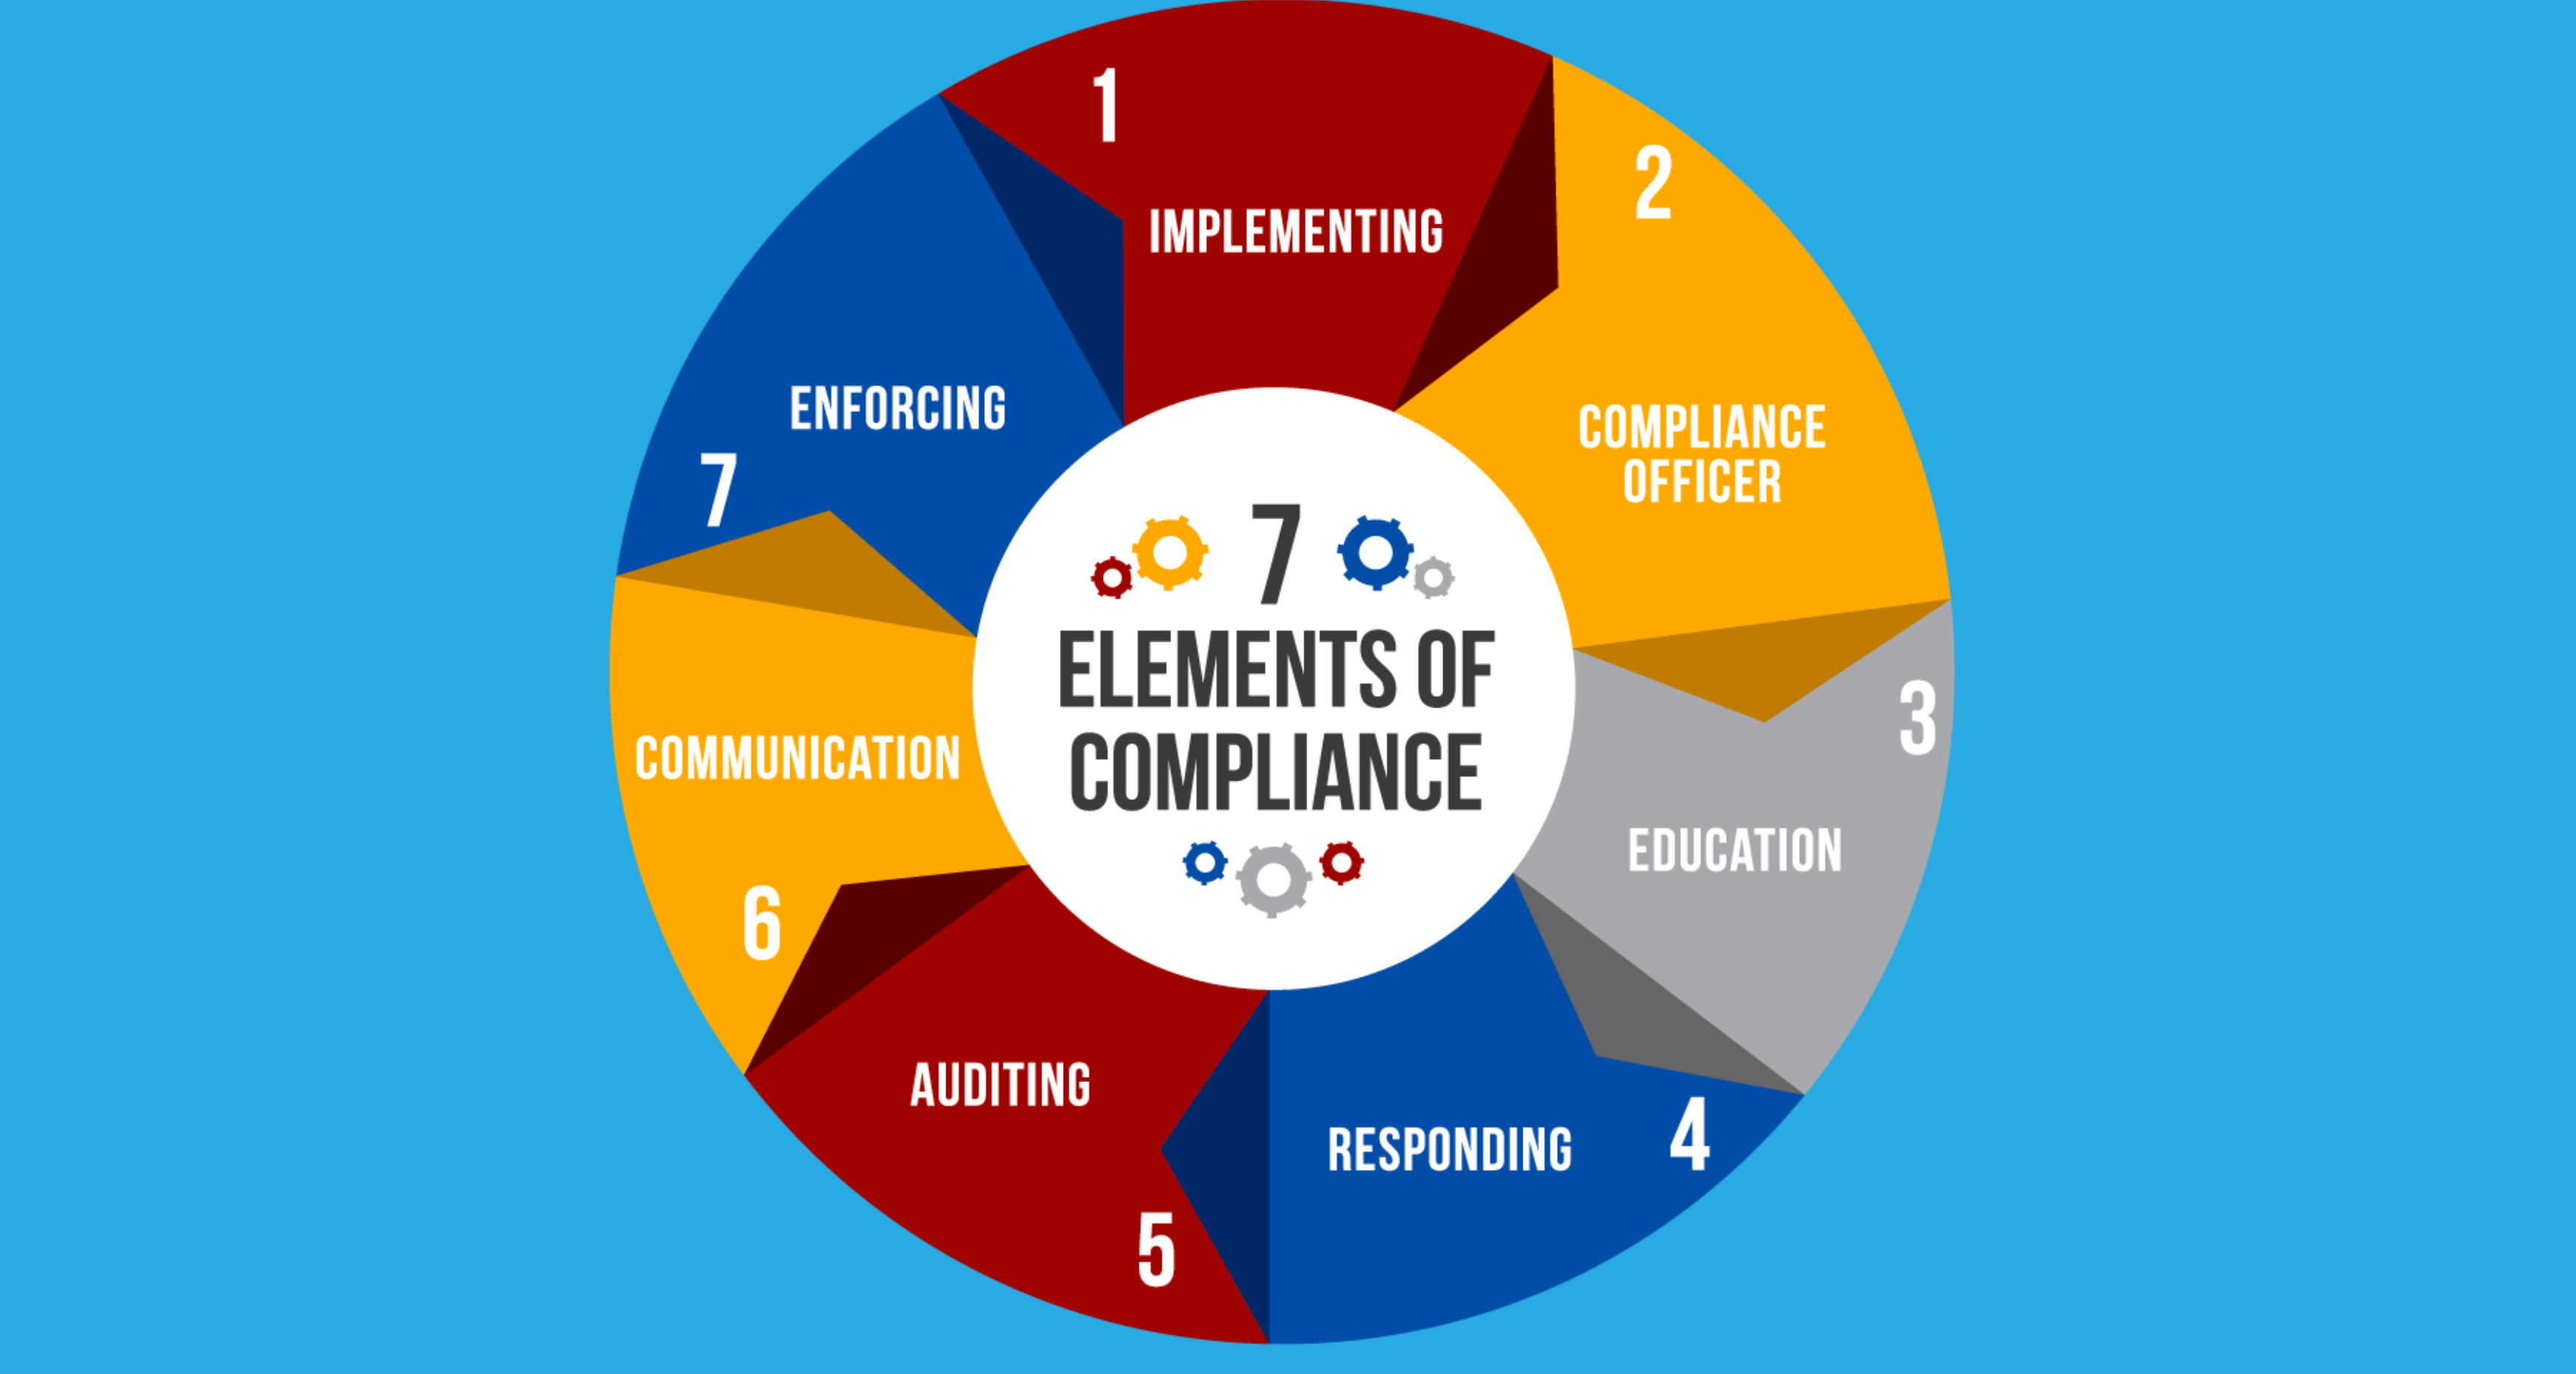 The 7 elements of a good online course